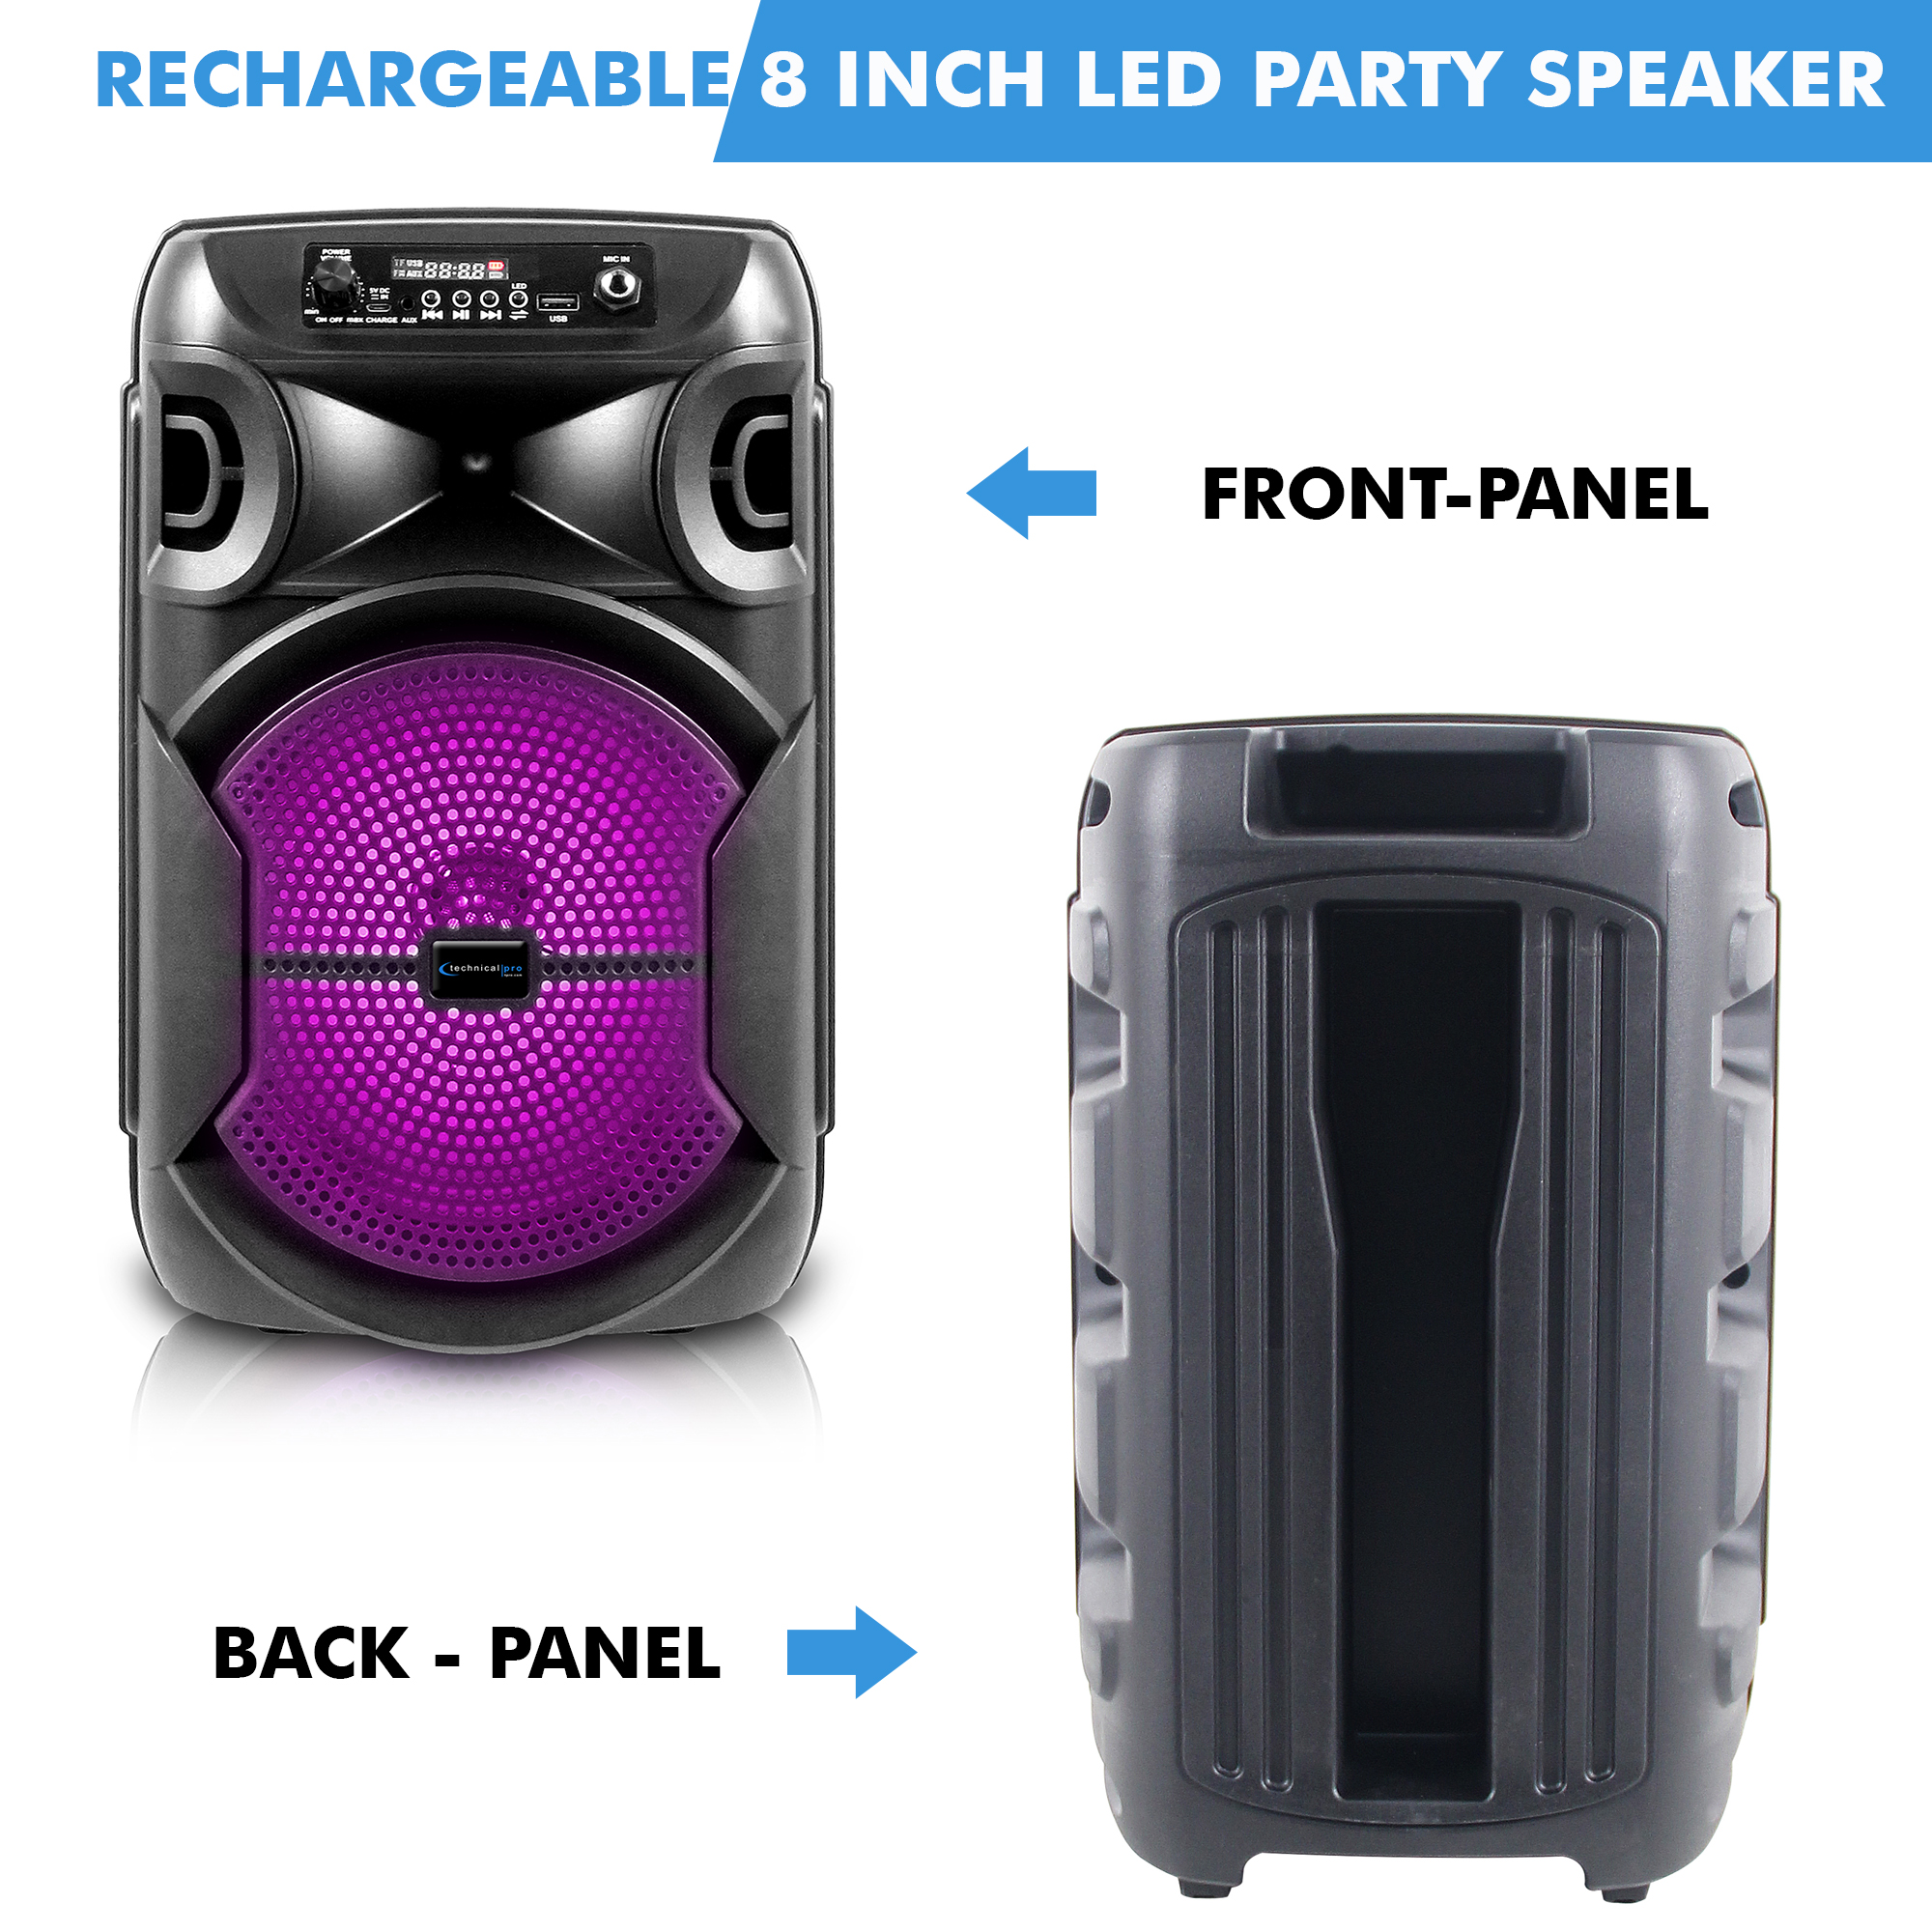 Technical Pro 3 Set  8" Portable 1000 W Bluetooth Speaker w/ Woofer & Tweeter Party PA LED Speaker w/ Bluetooth/USB Card Inputs - image 3 of 6